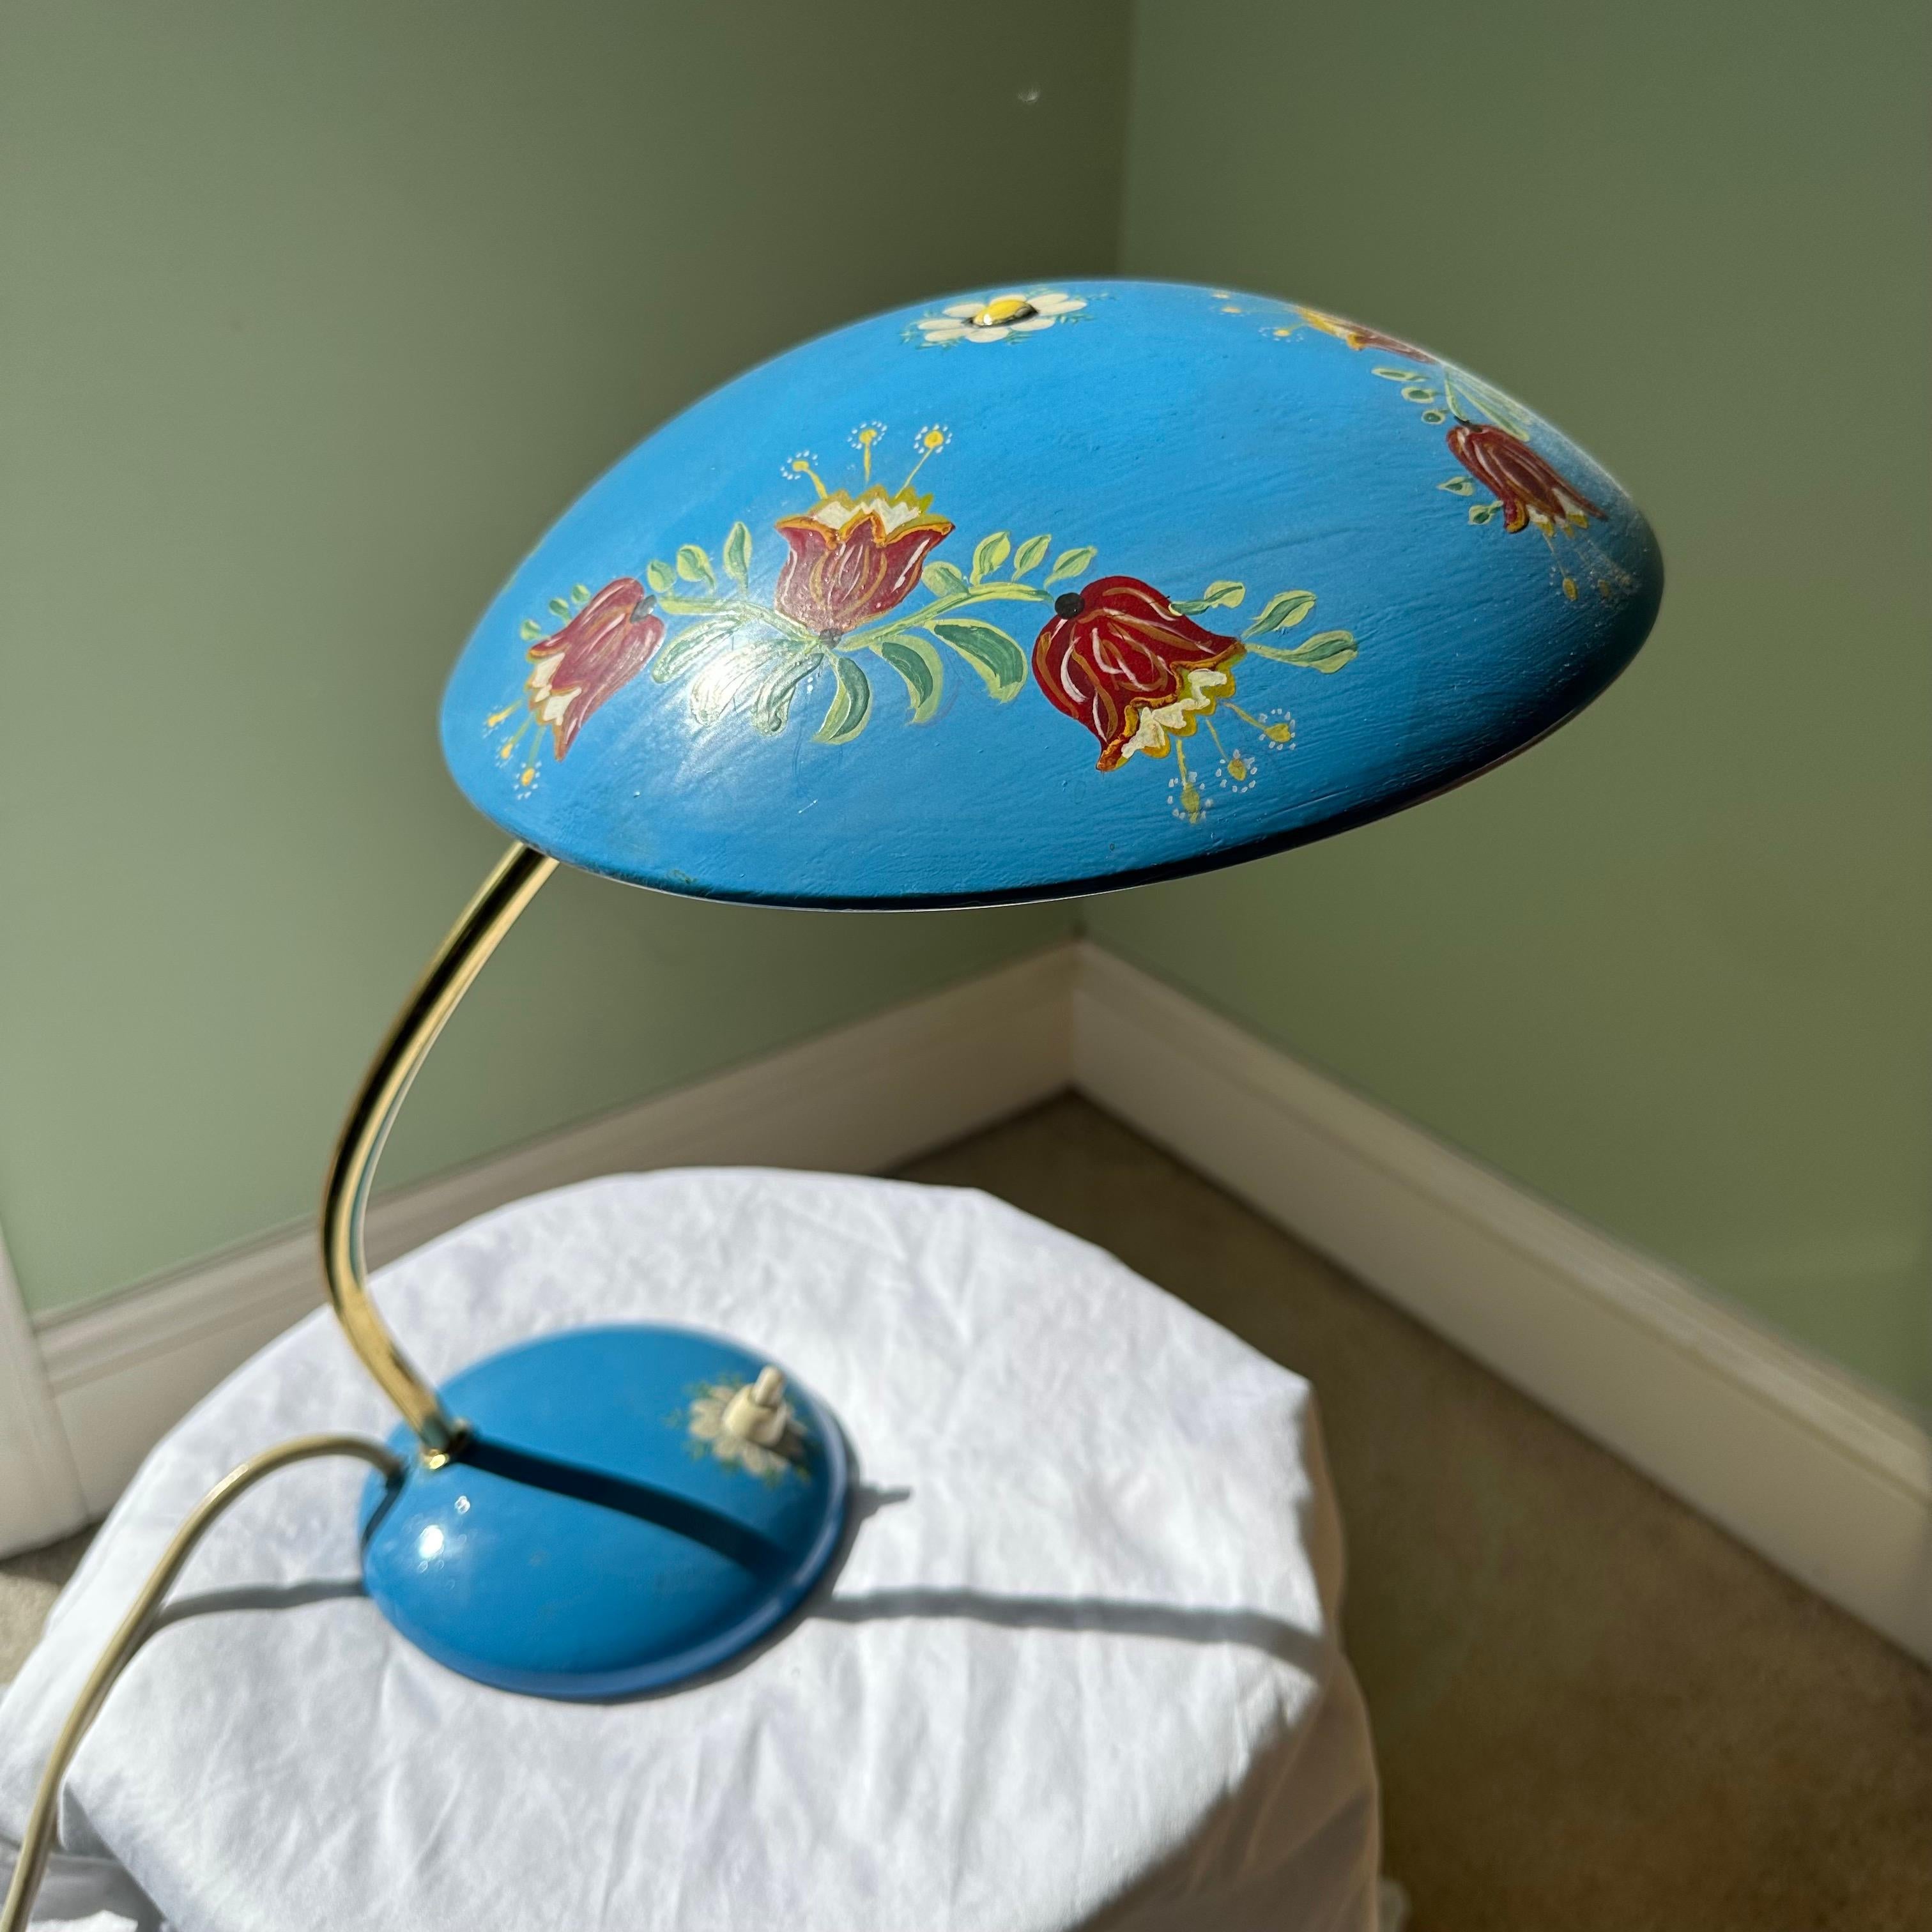 Metal Mid-Century Modern Table Lamp in Brass and Blue Lacquer with Hand-Painted Flower